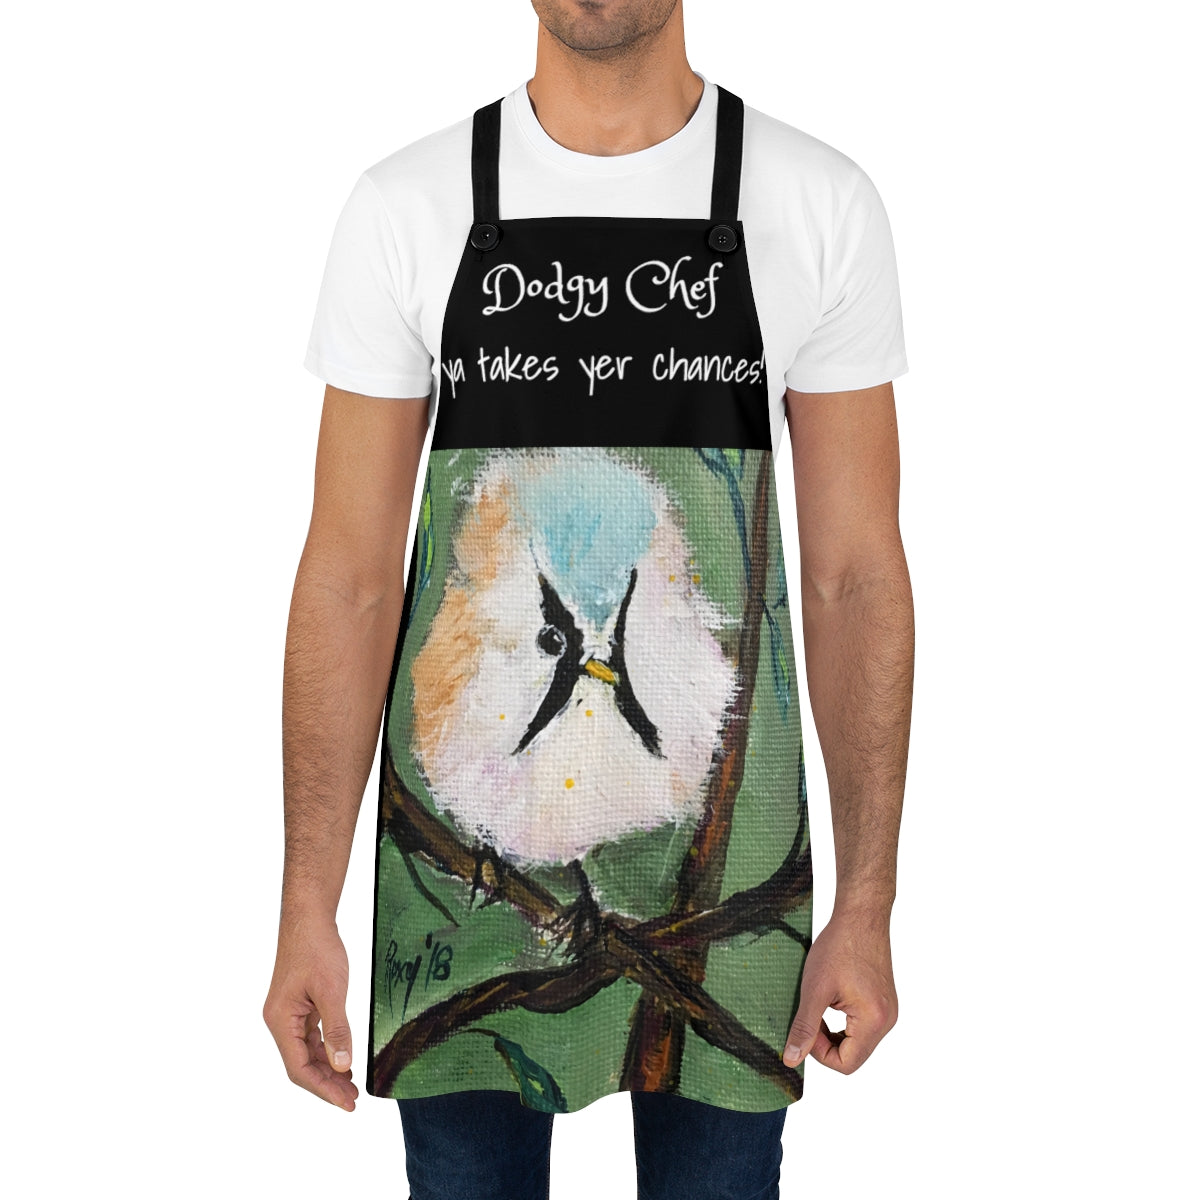 Dodgy Chef Apron funny British UK phrase saying on a Black Kitchen Apron  with Original  Bearded Tit Painting Art Print Wearable Art